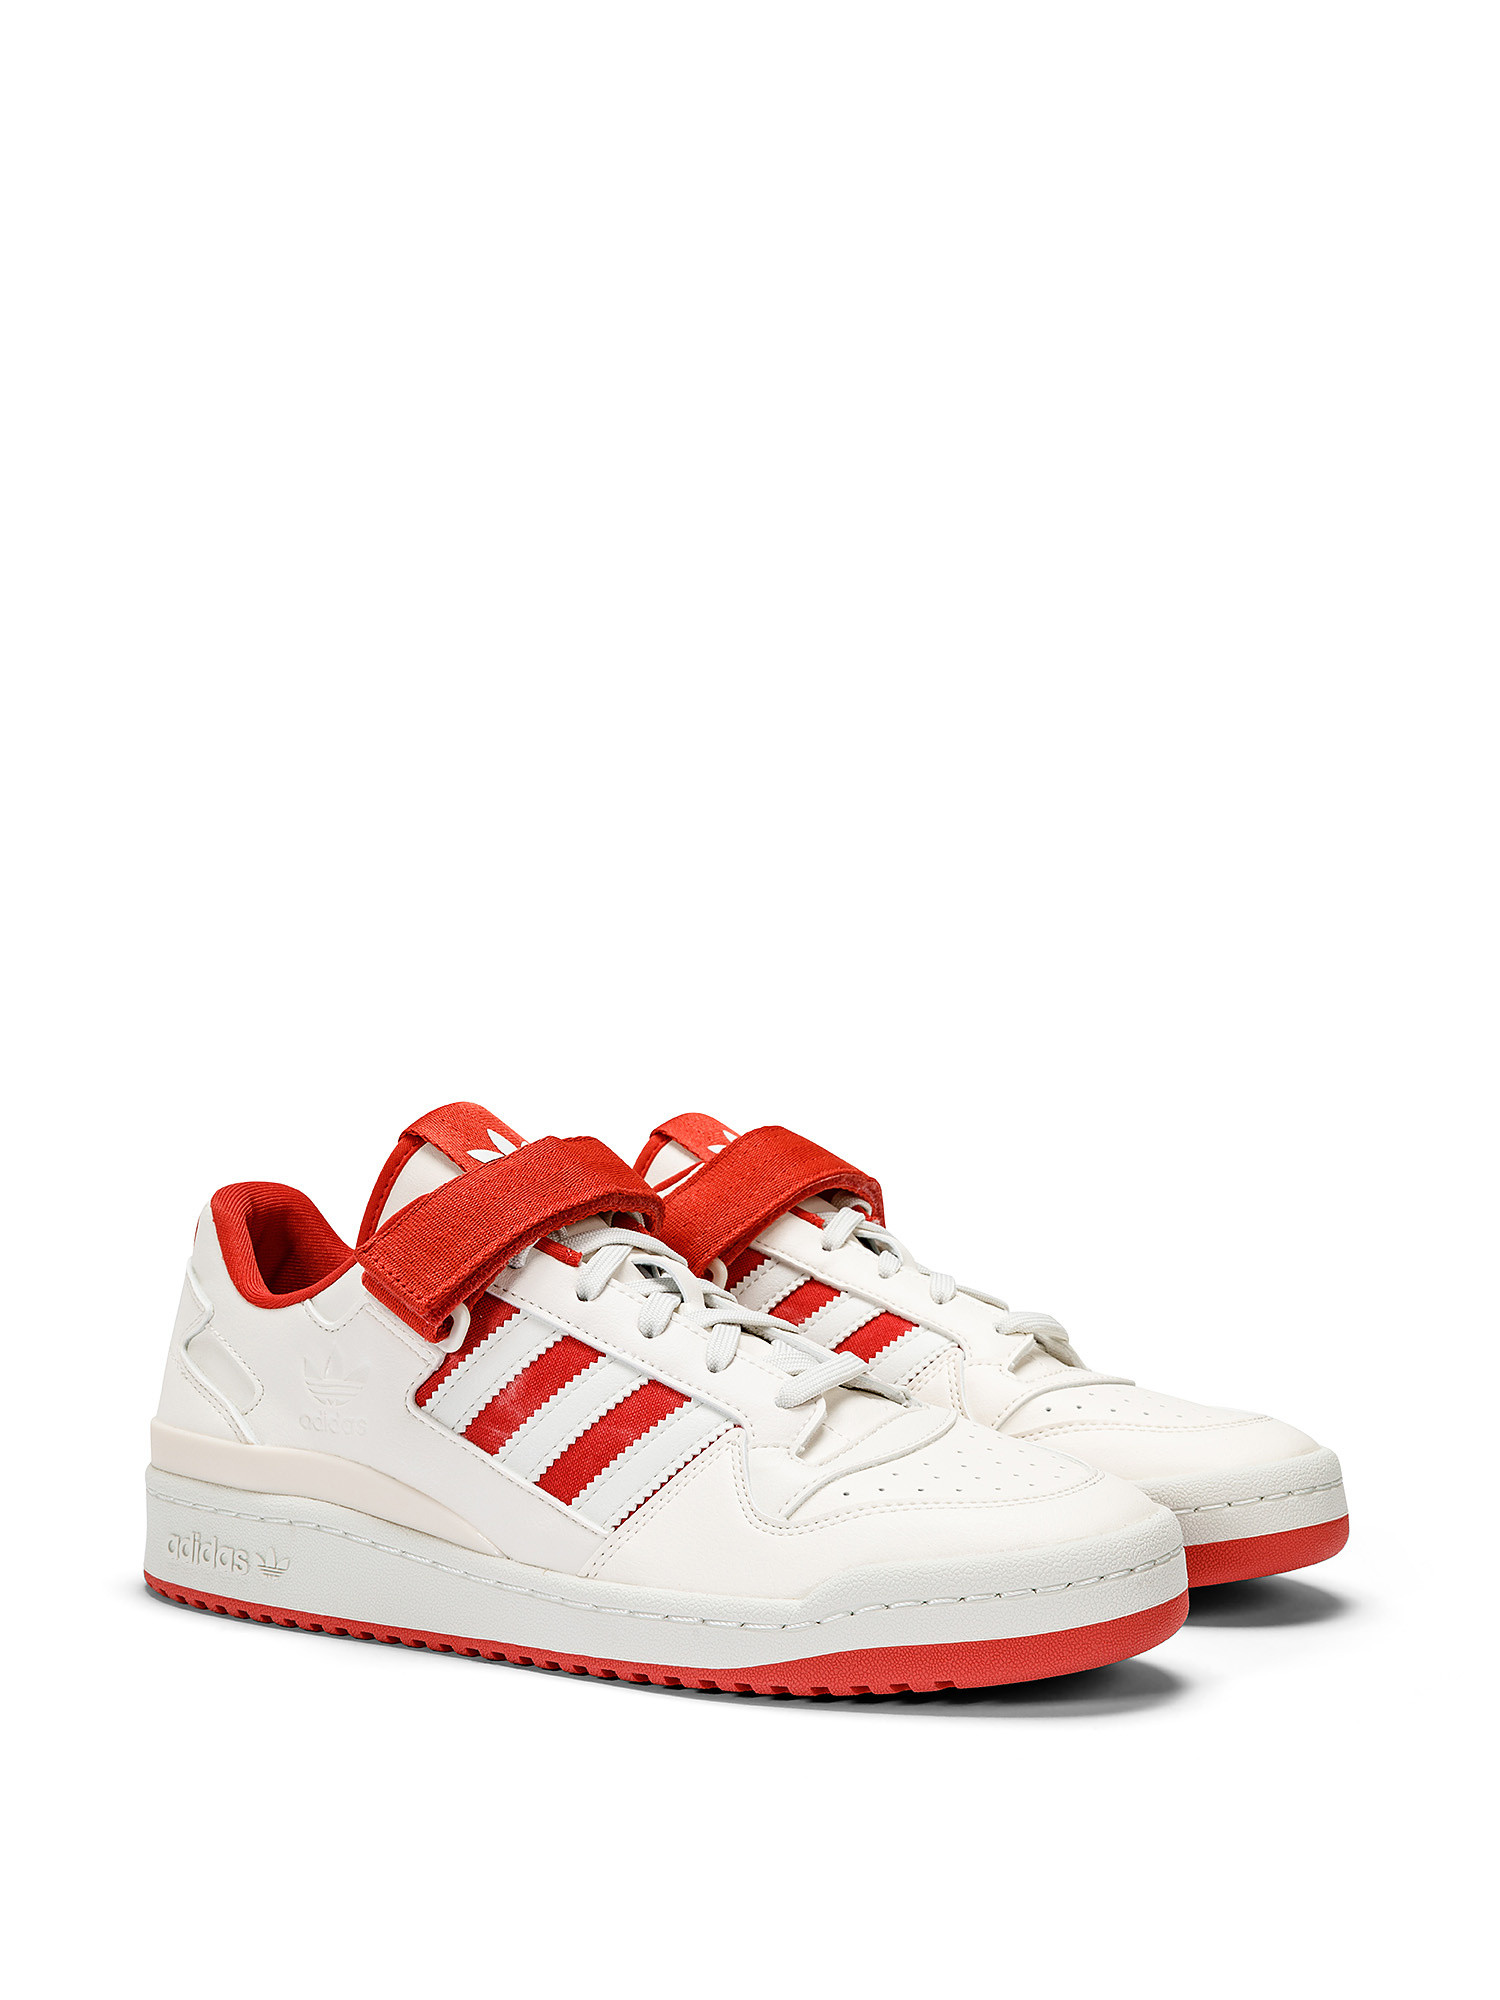 Adidas - Forum Low Shoes, White, large image number 1